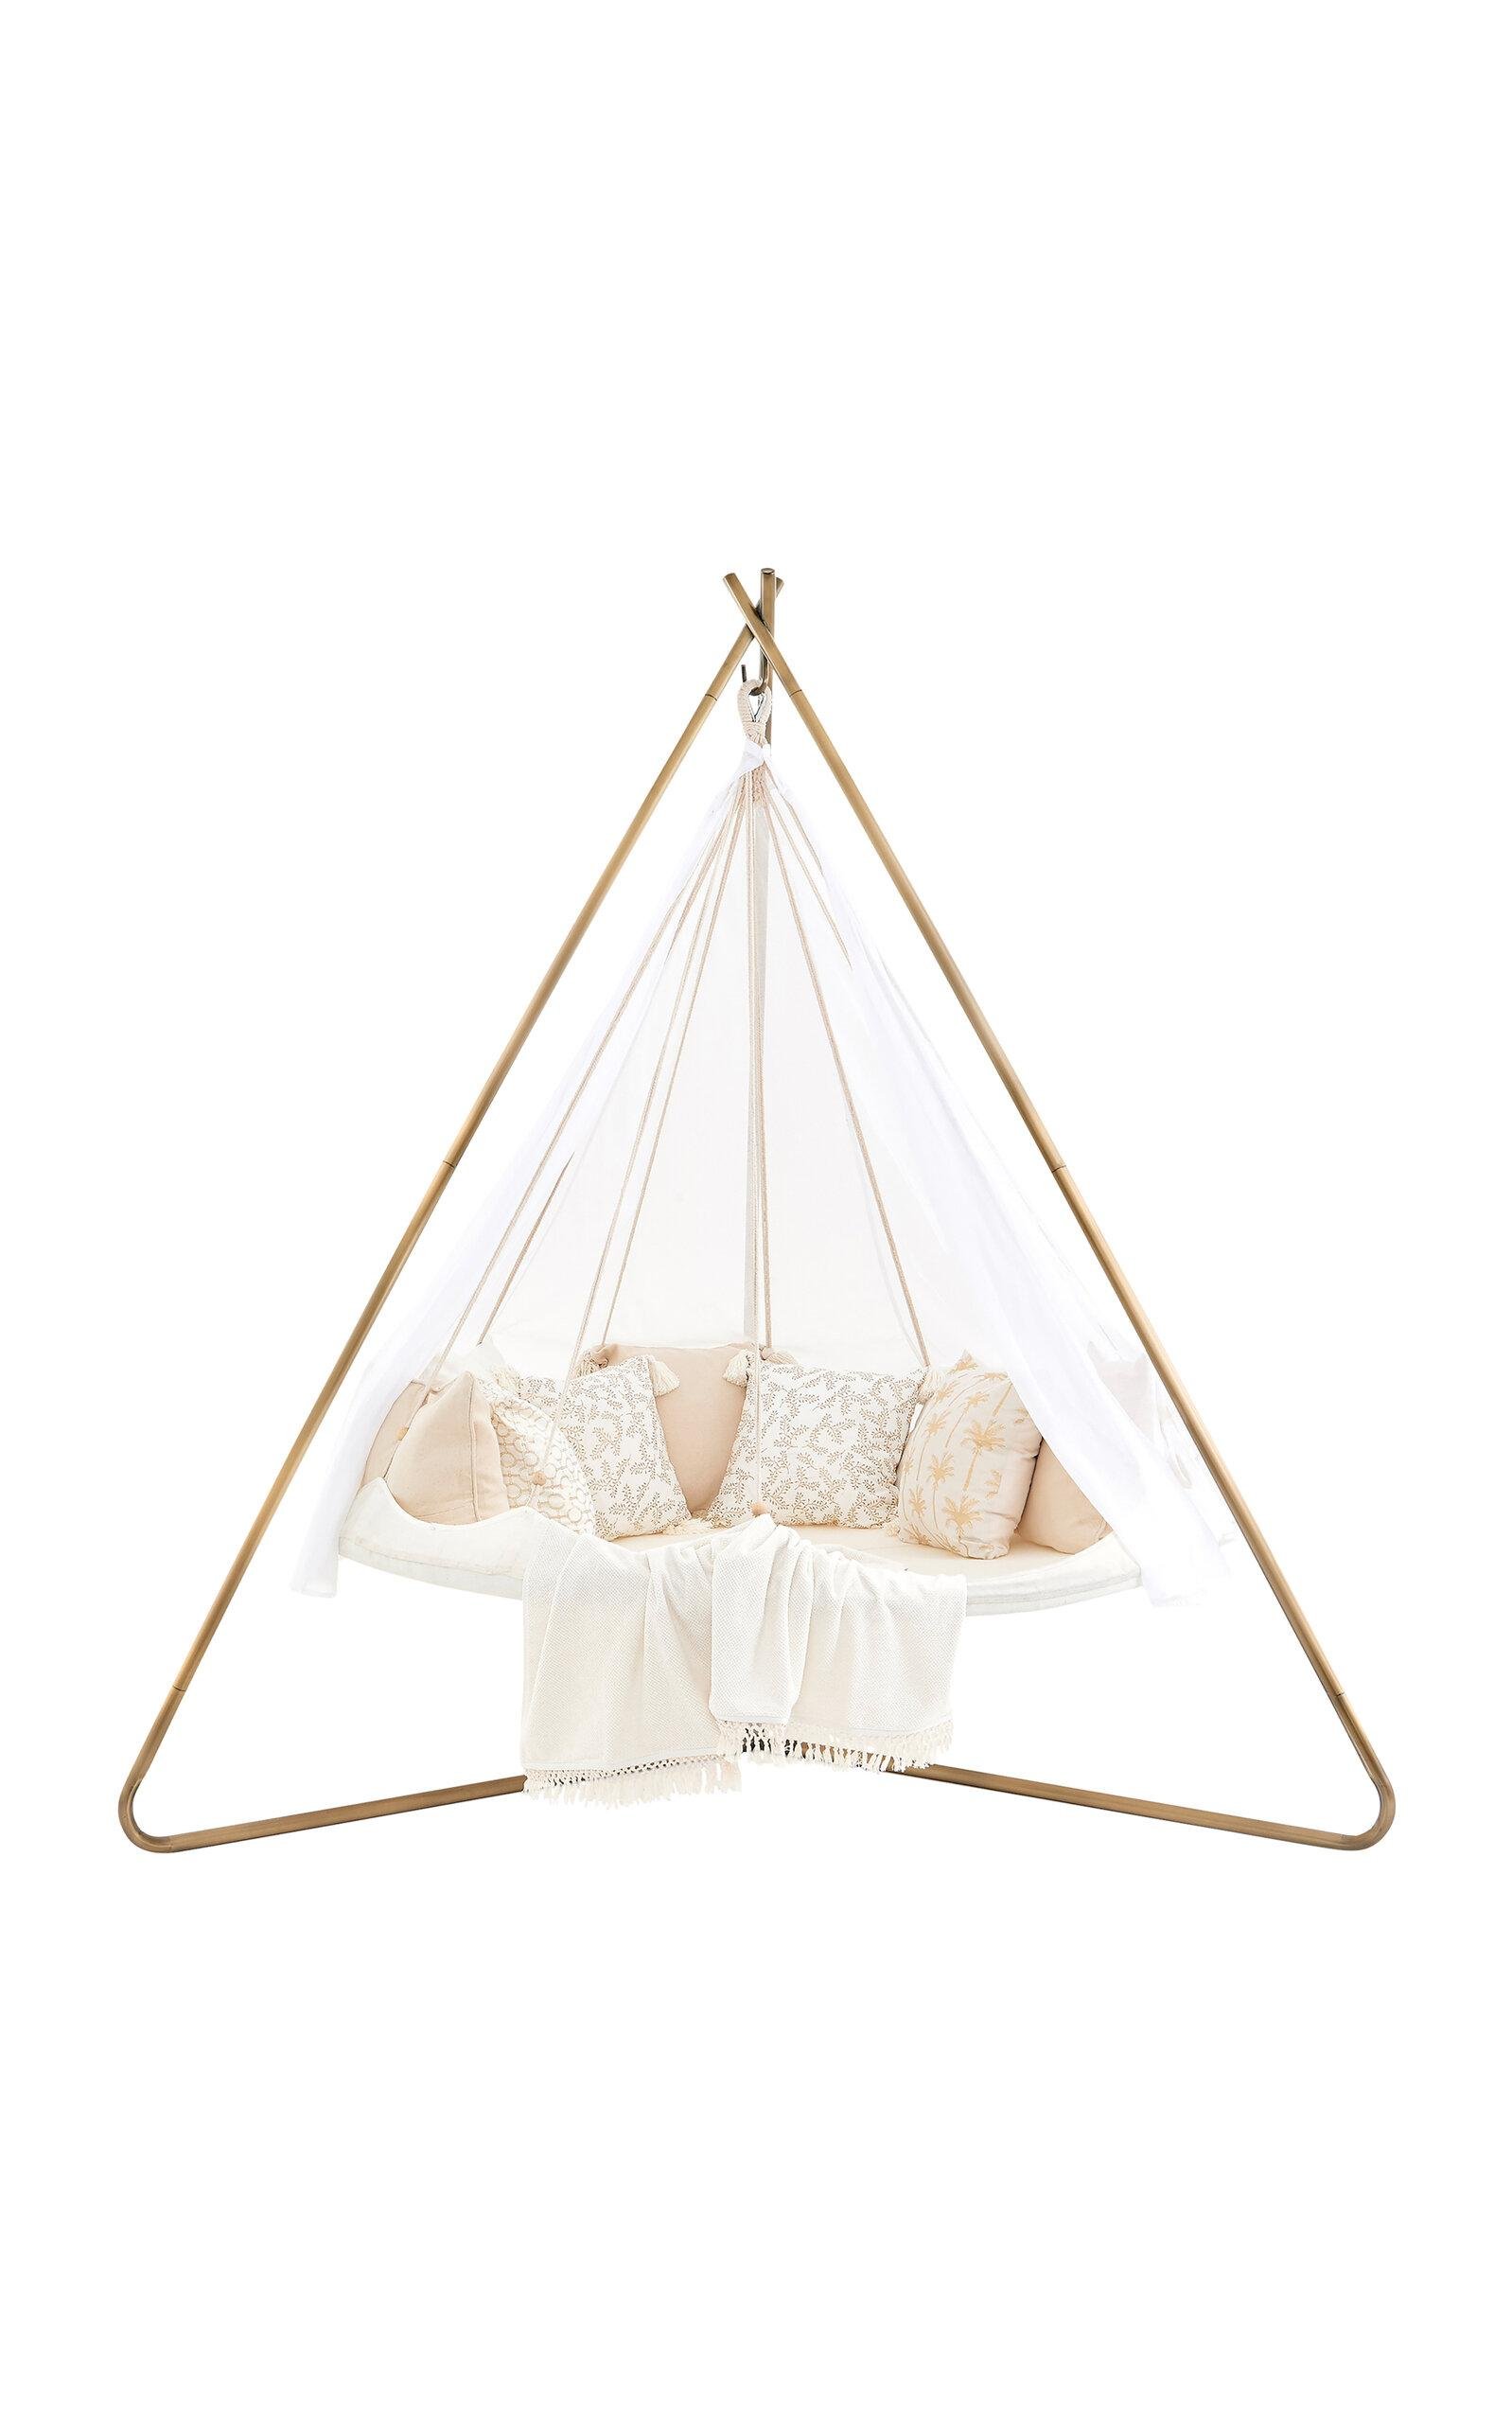 TiiPii Bed - Large Deluxe Sunbrella TiiPii Bed + Deluxe Bronzed Stainless Steel Stand Set - White - Moda Operandi by TIIPII BED